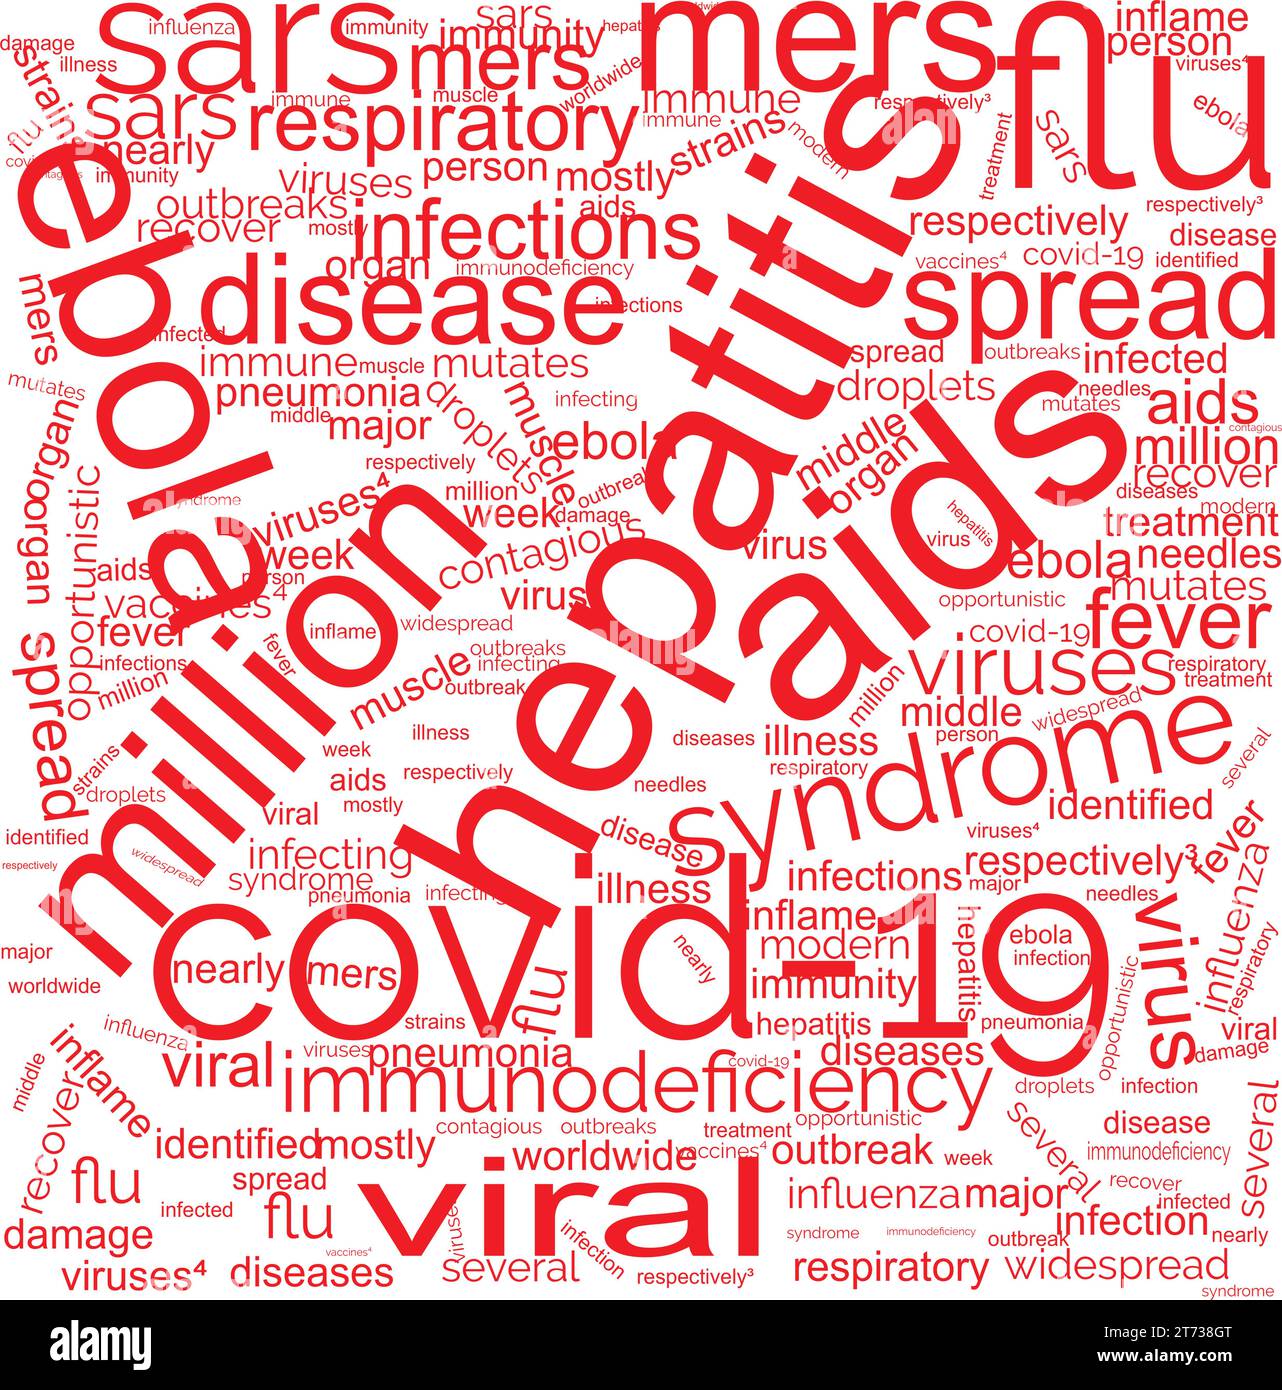 COVID-19 and Other Fatal Viruses including wordcloud vector Stock Vector